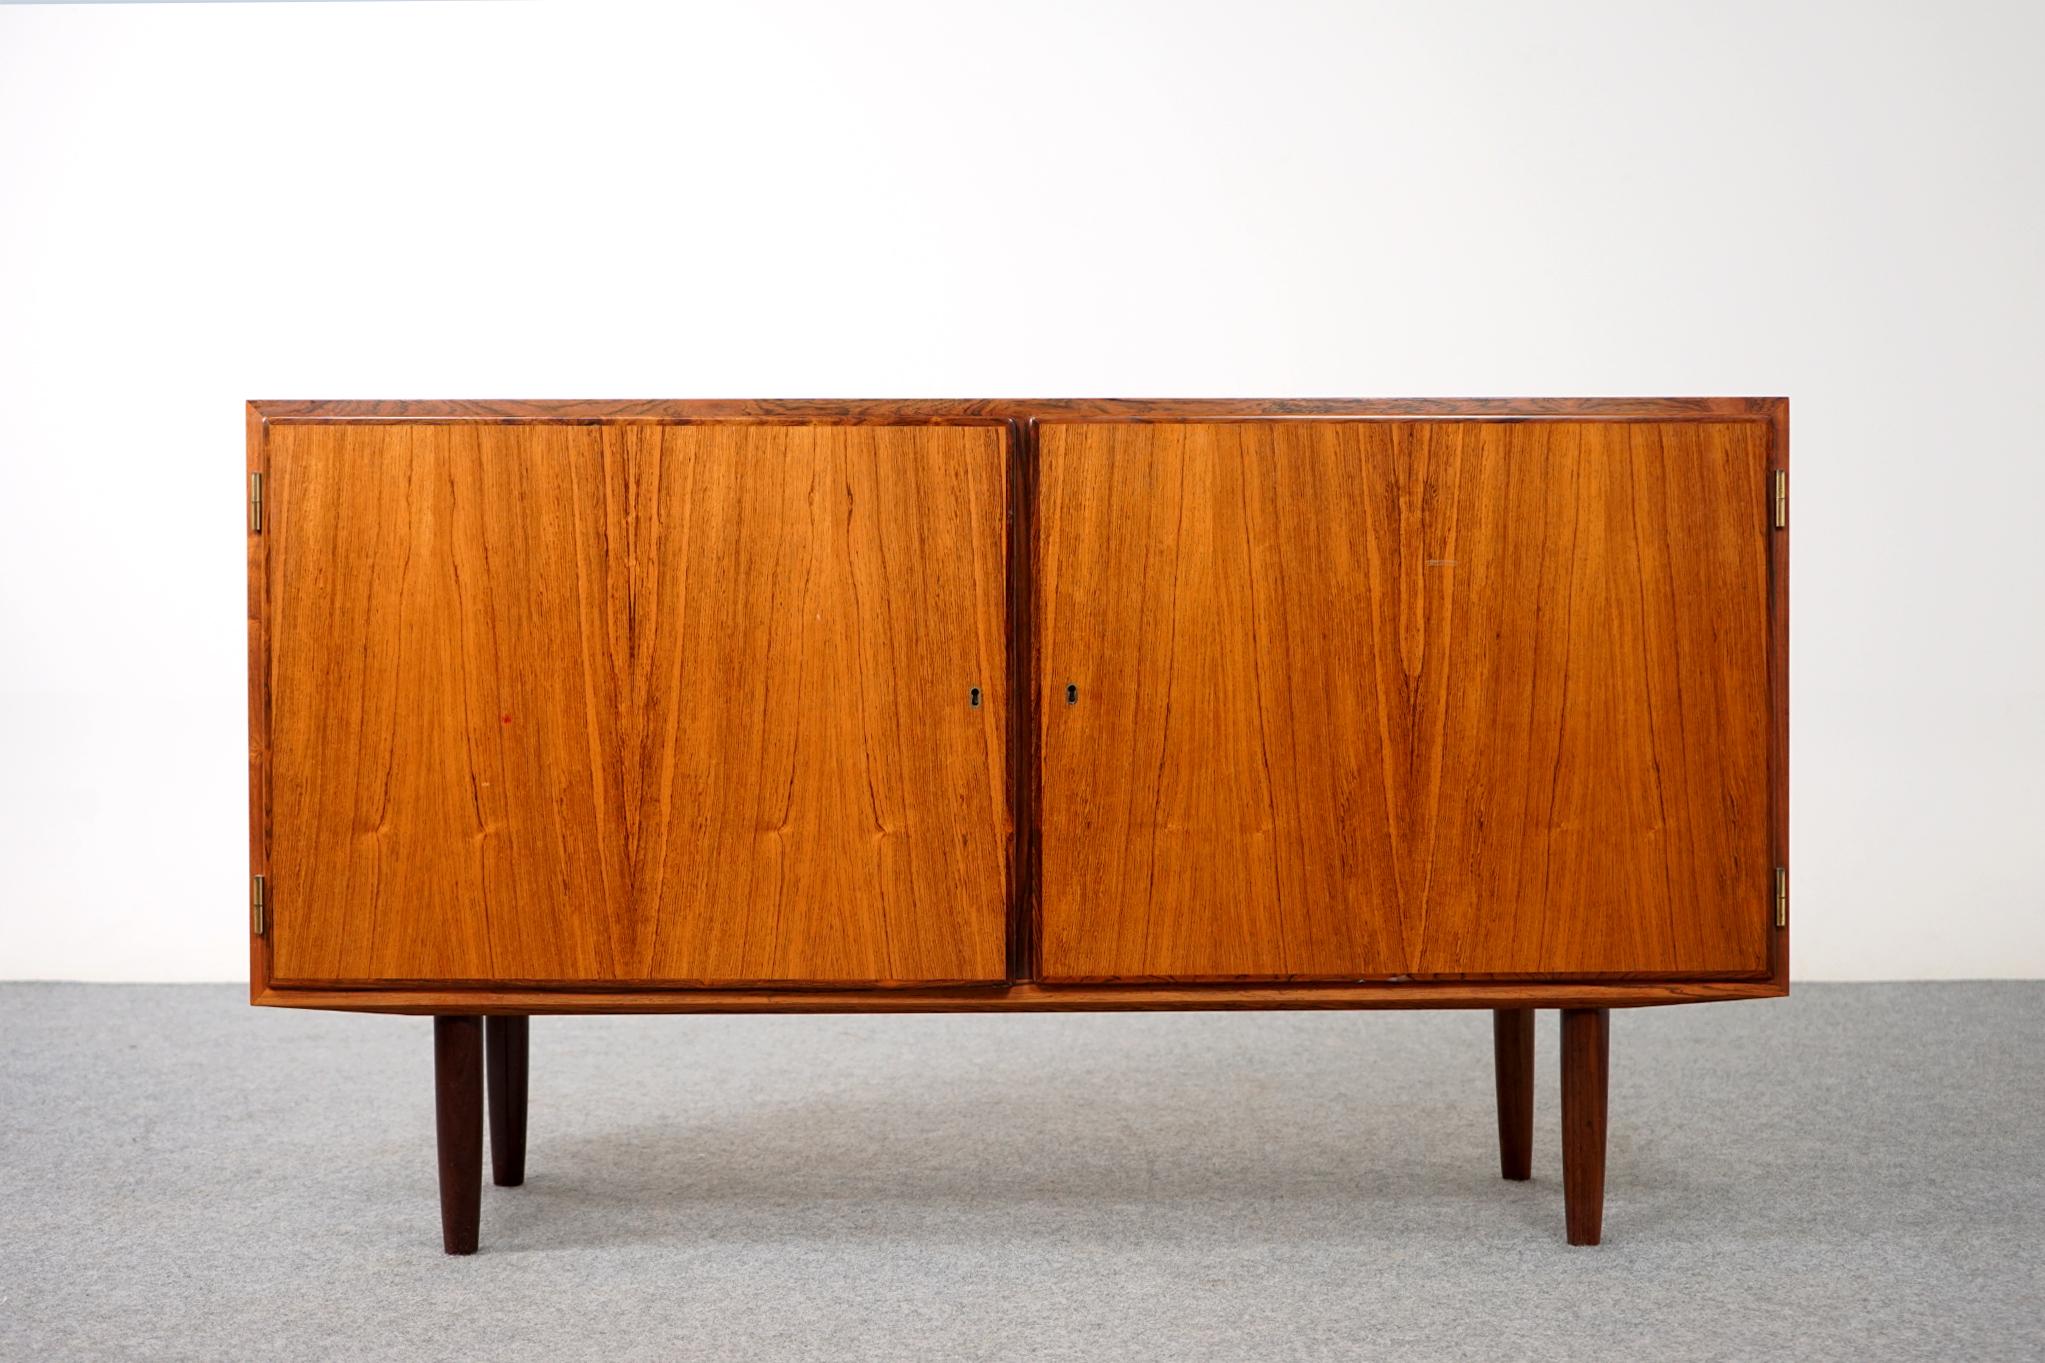 Rosewood double door sideboard by Hundevad, circa 1960's. Clean, simple lined design with exceptional book-matched veneer. Tapering cylindrical legs offer a light airy feel. Interior compartments have 2 adjustable shelves and 3 sleek adjustable